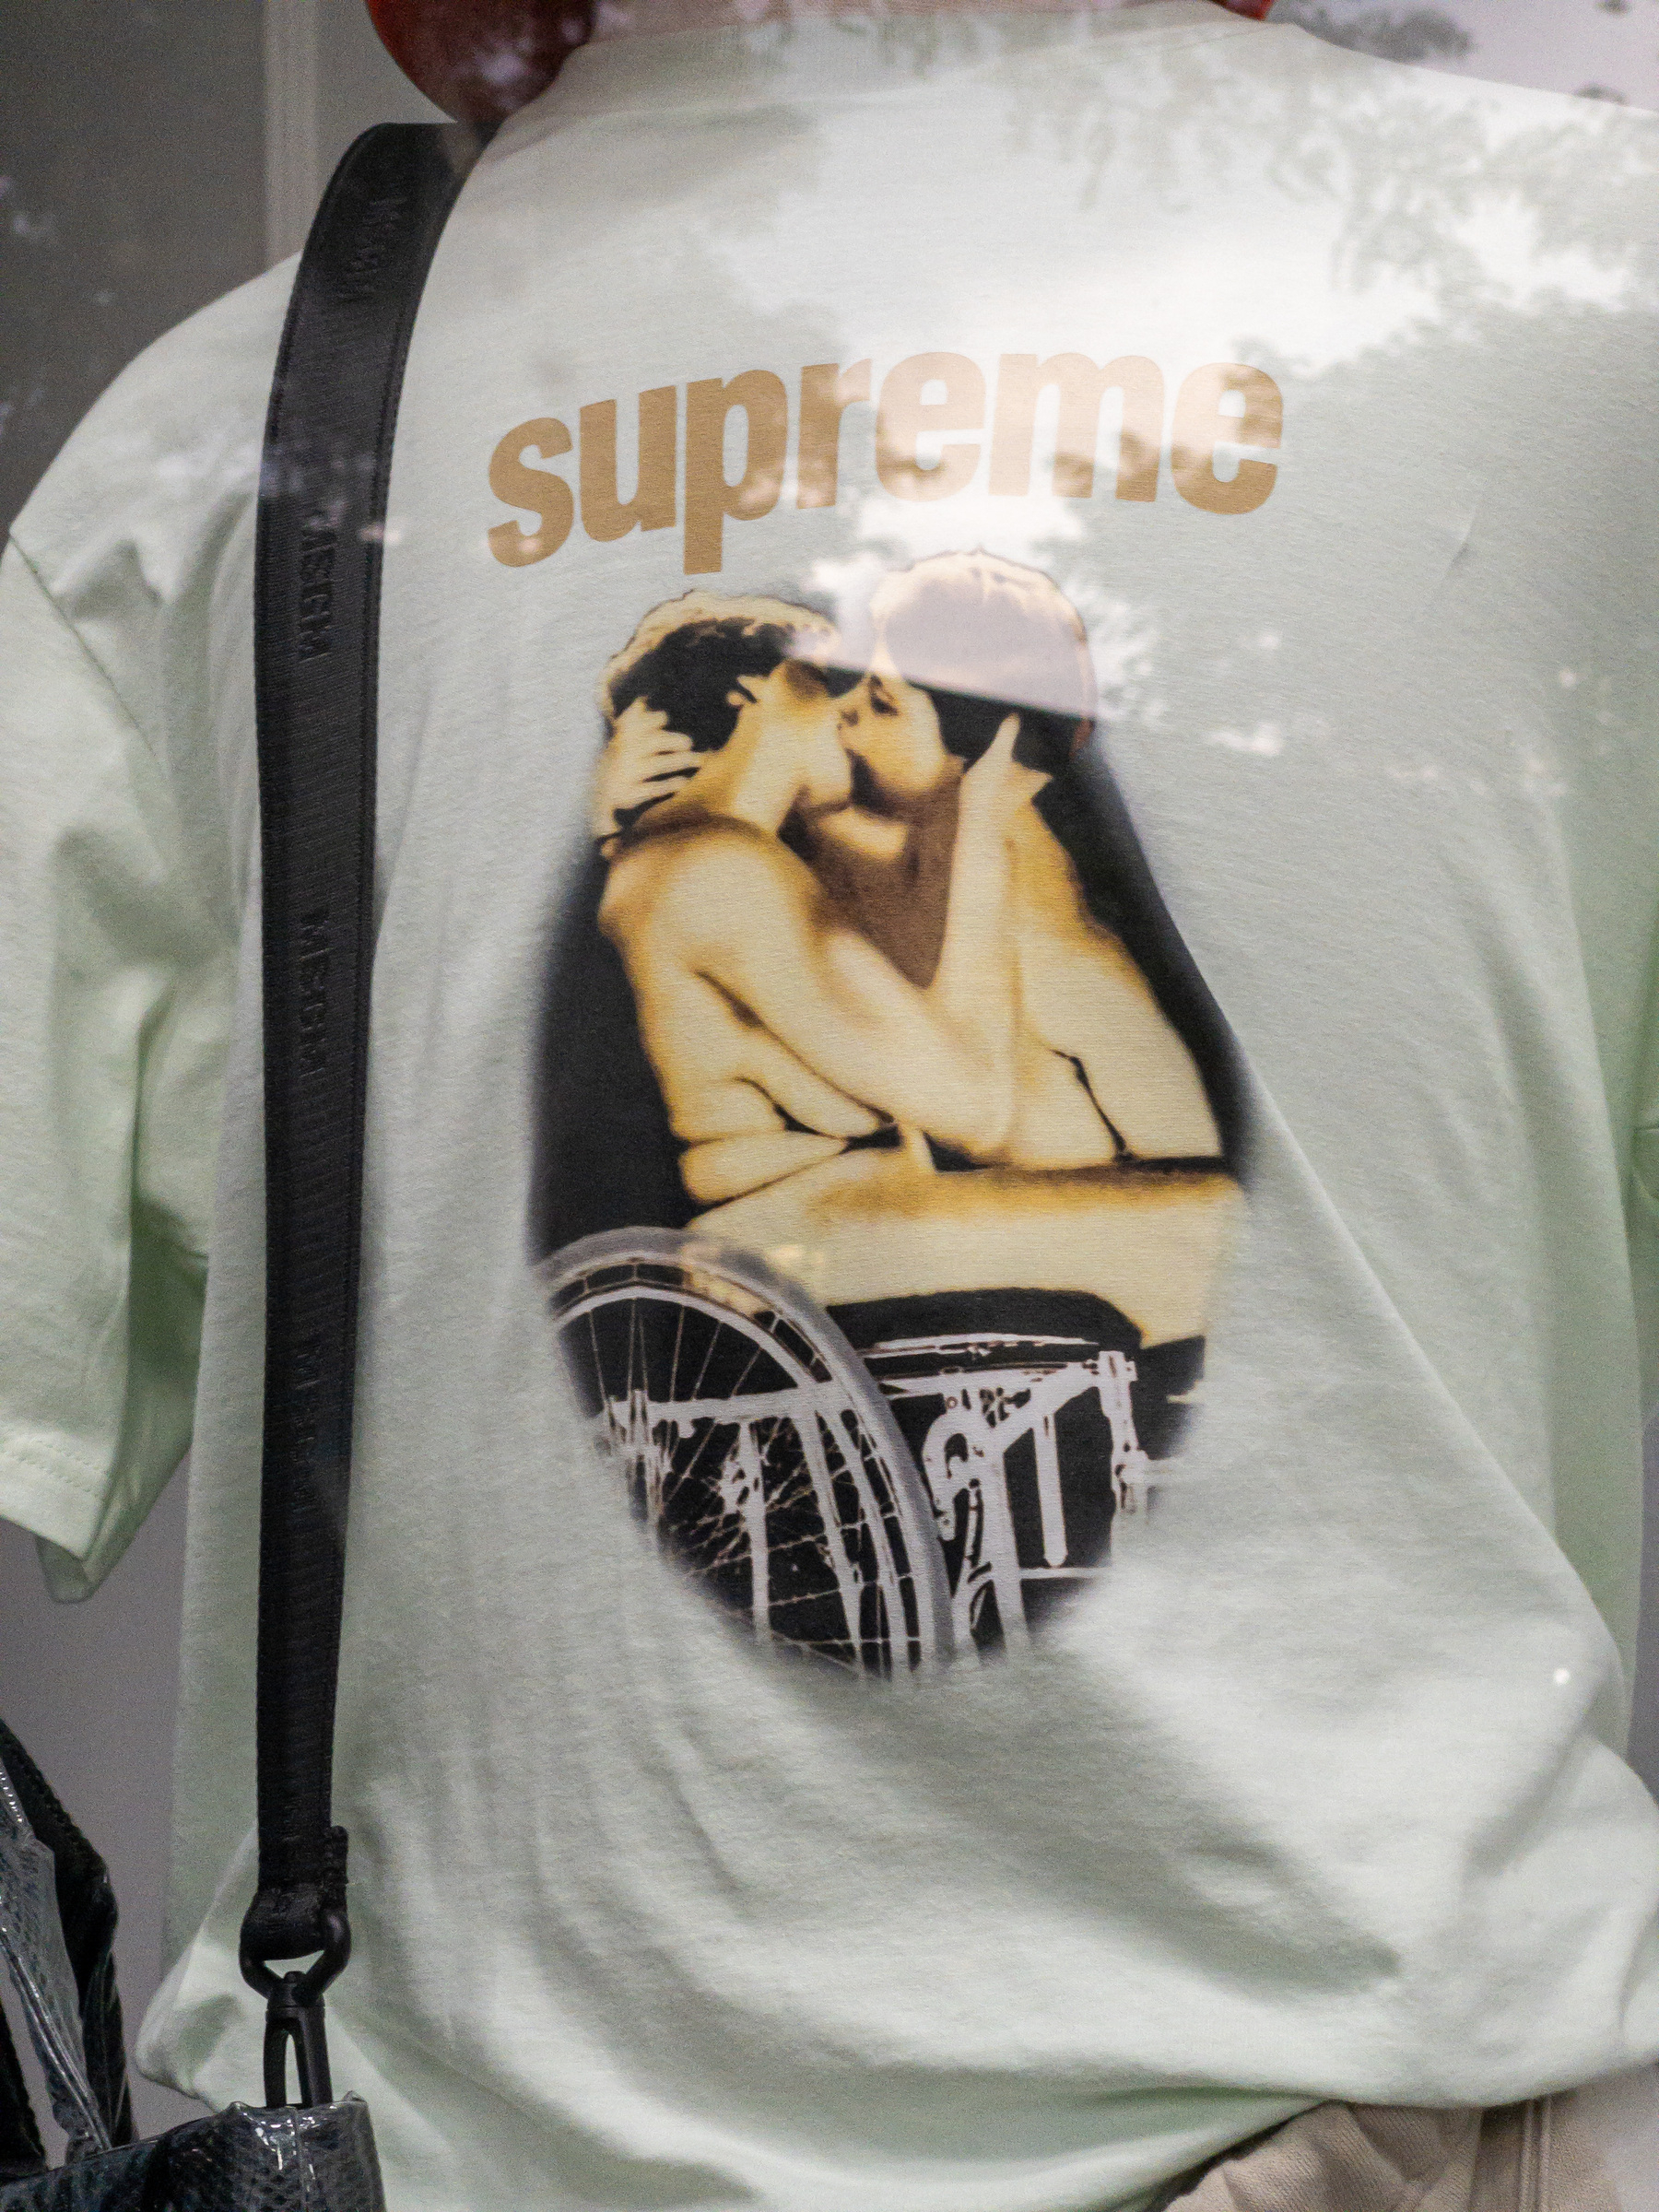 Closeup of the back of a white t-shirt with “supreme” written and a screen shot of a person of unknown sex kissing a woman sitting in a wheelchair. Both are naked.